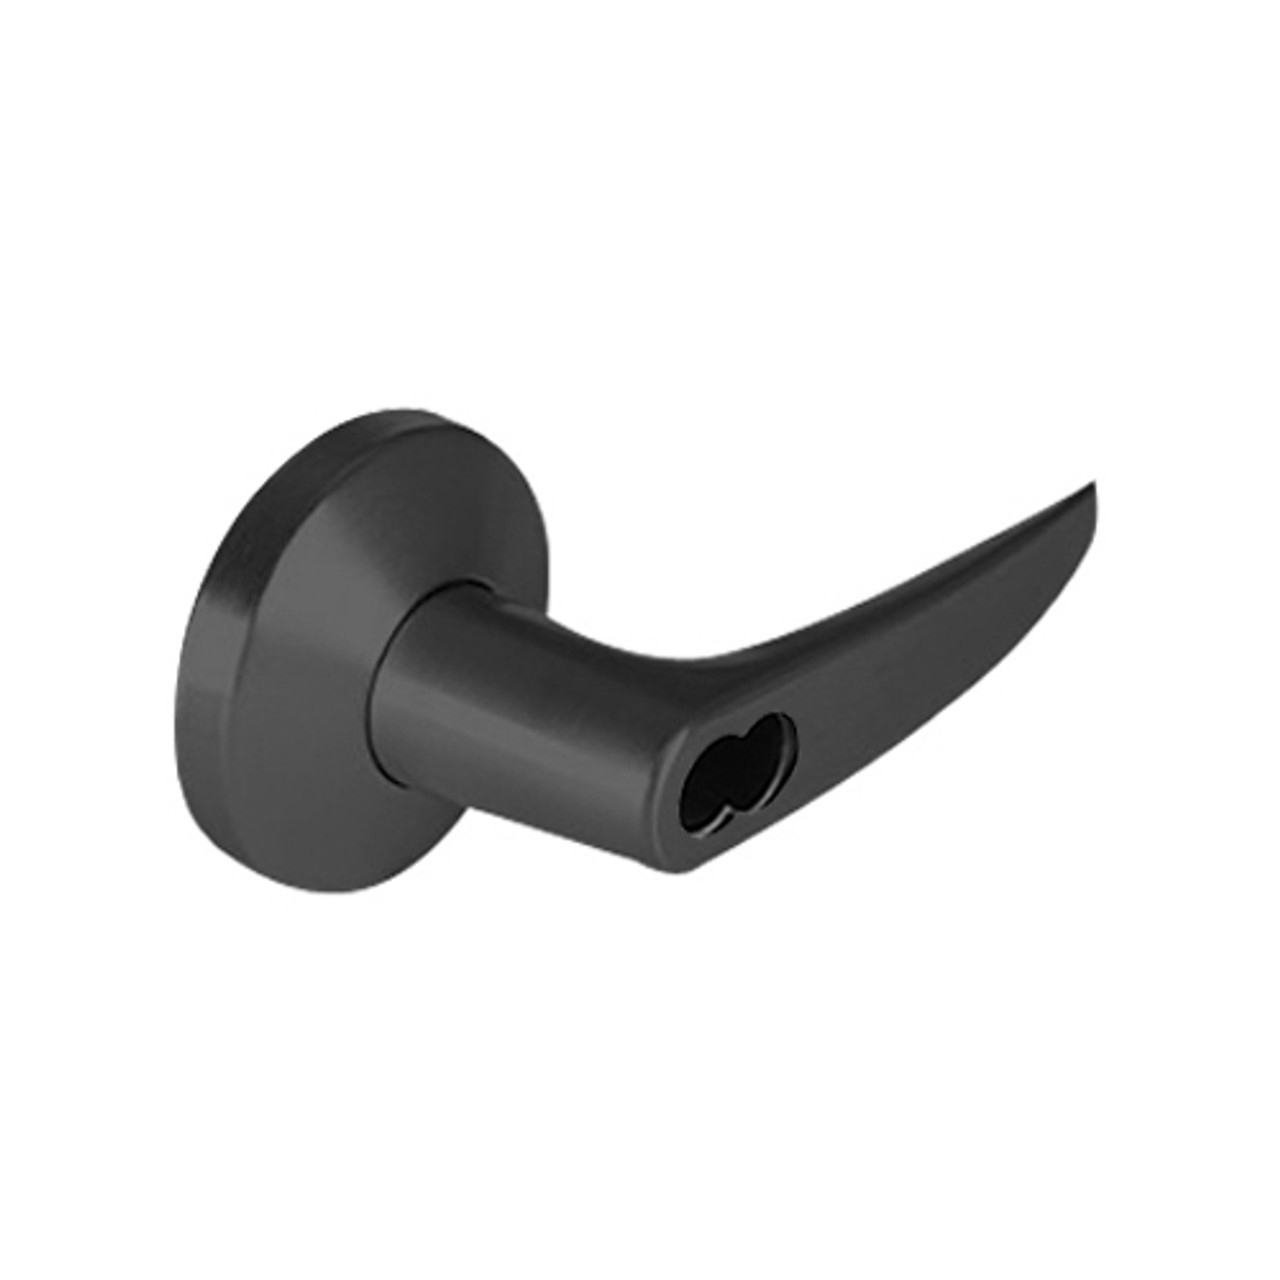 9K37A16KSTK622LM Best 9K Series Dormitory or Storeroom Cylindrical Lever Locks with Curved without Return Lever Design Accept 7 Pin Best Core in Black